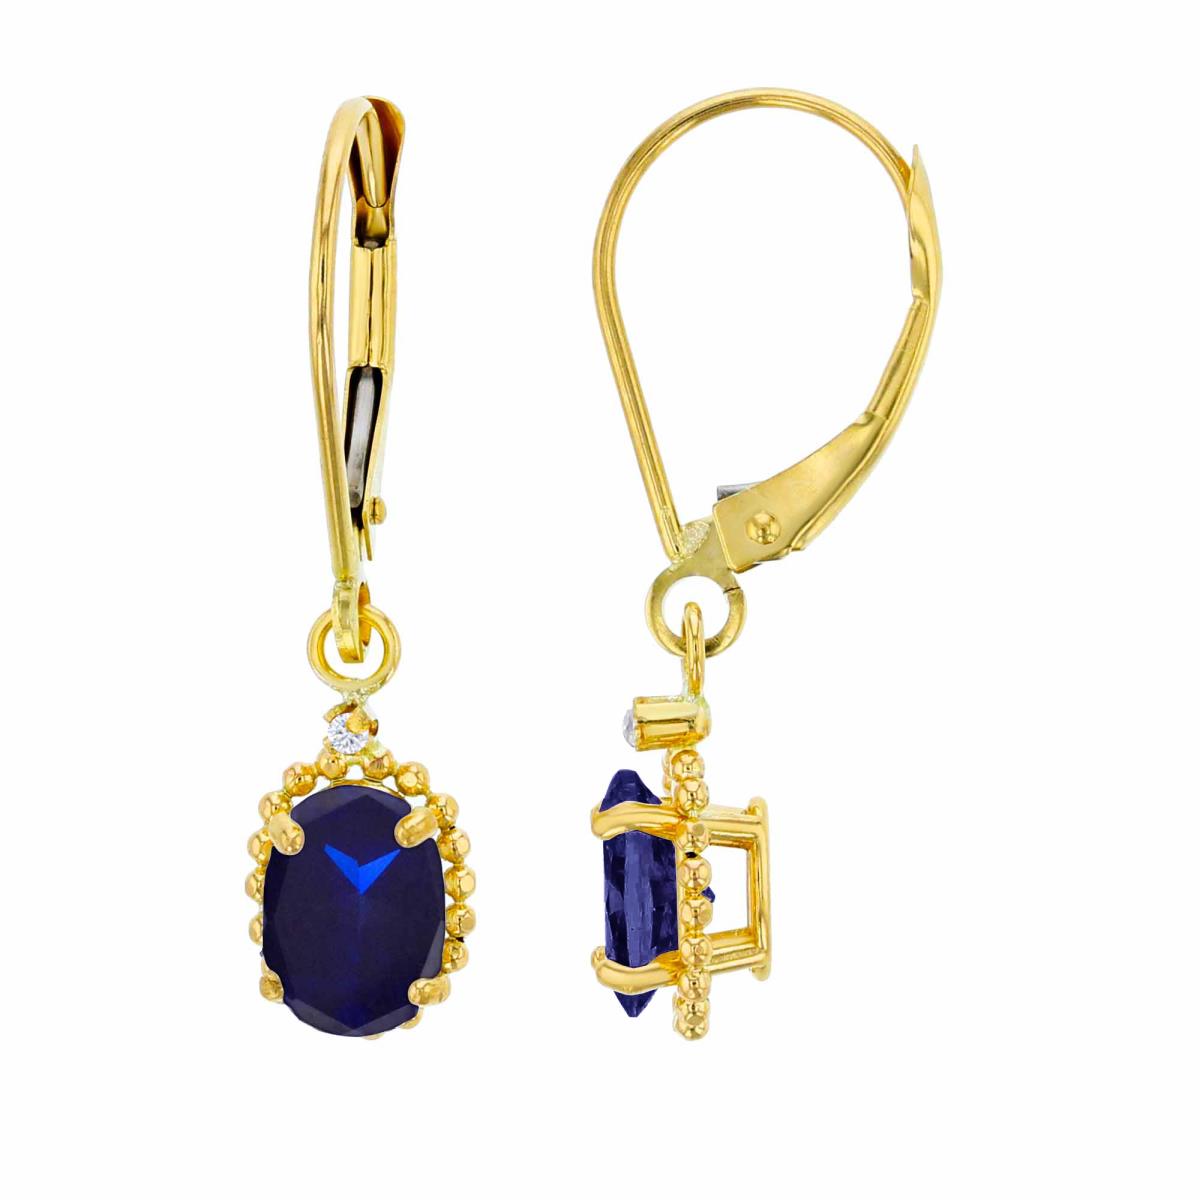 10K Yellow Gold 1.25mm Rd Created White Sapphire & 6x4mm Ov Created Blue Sapphire Bead Frame Drop Lever-Back Earring